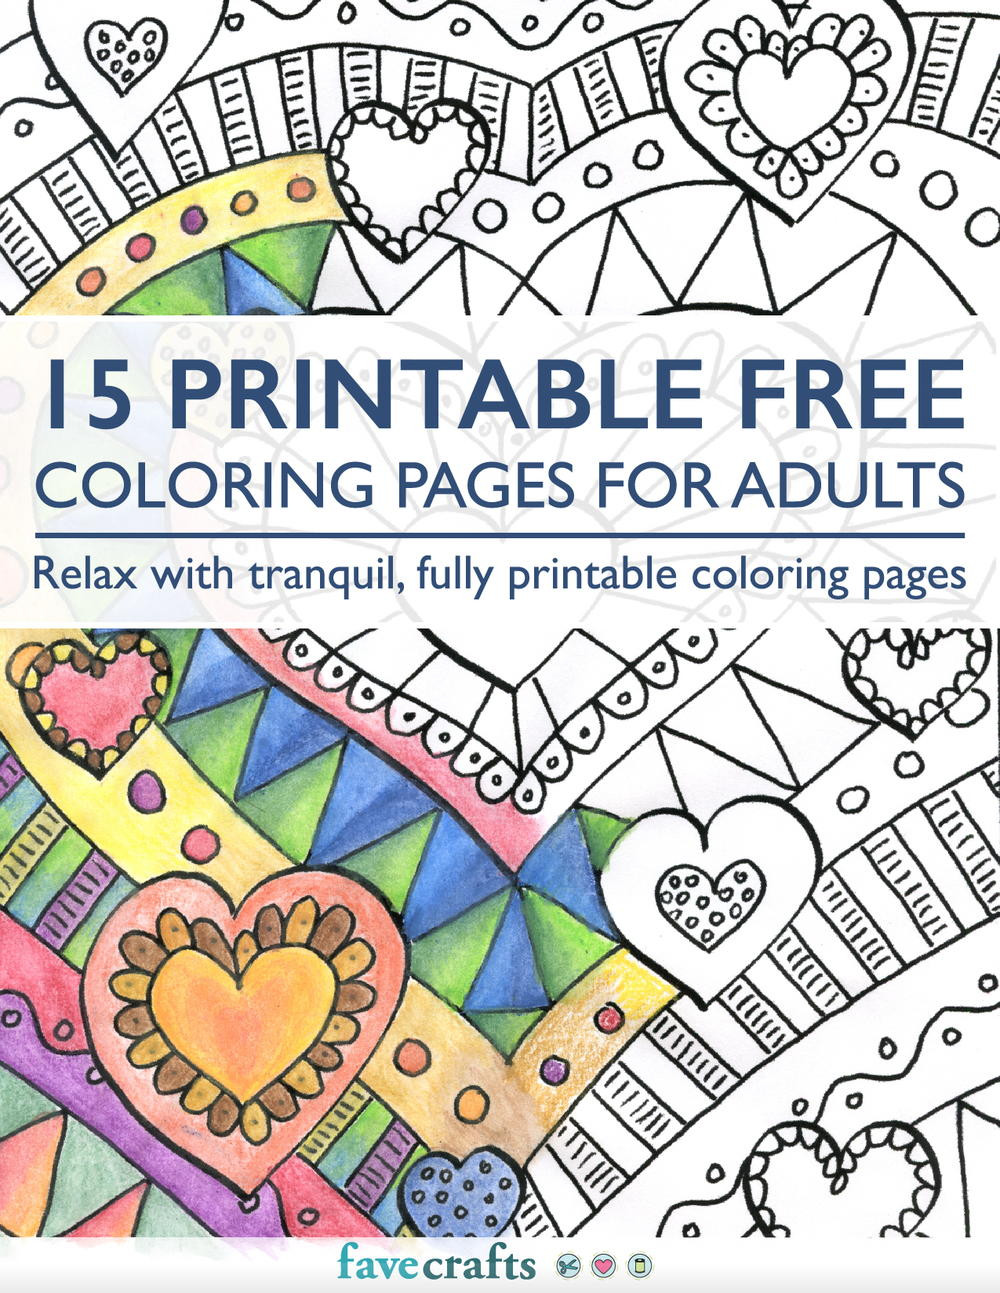 Large Adult Coloring Books
 15 Printable Free Coloring Pages for Adults [PDF